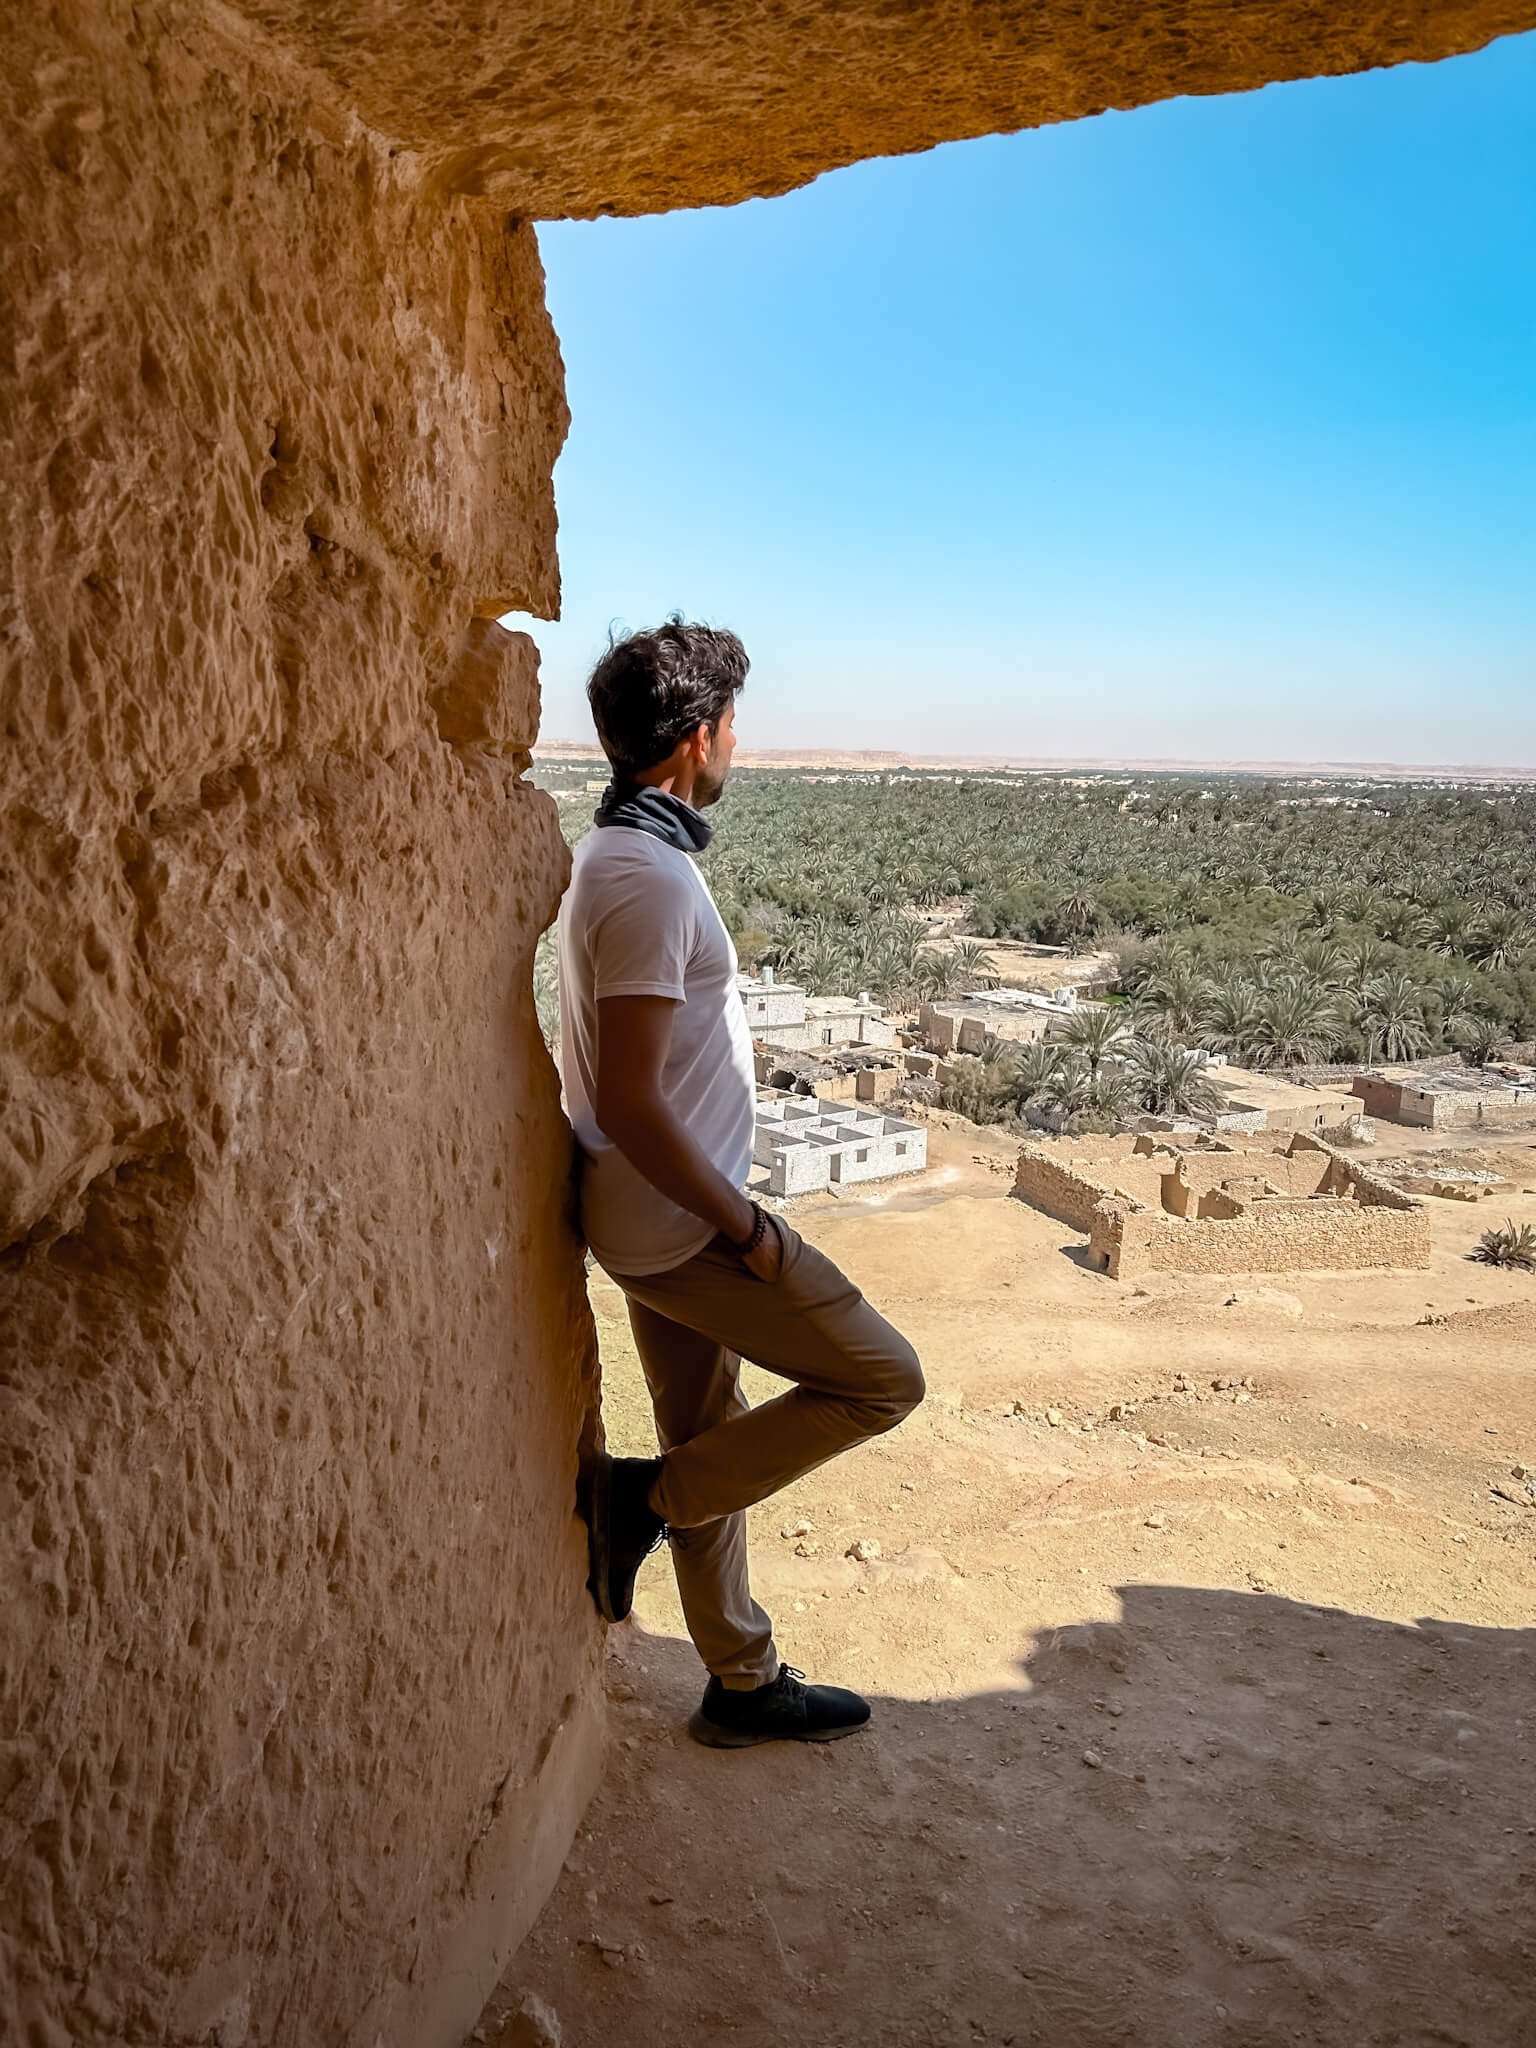 Fede at mountain of the dead, Siwa Oasis in Egypt